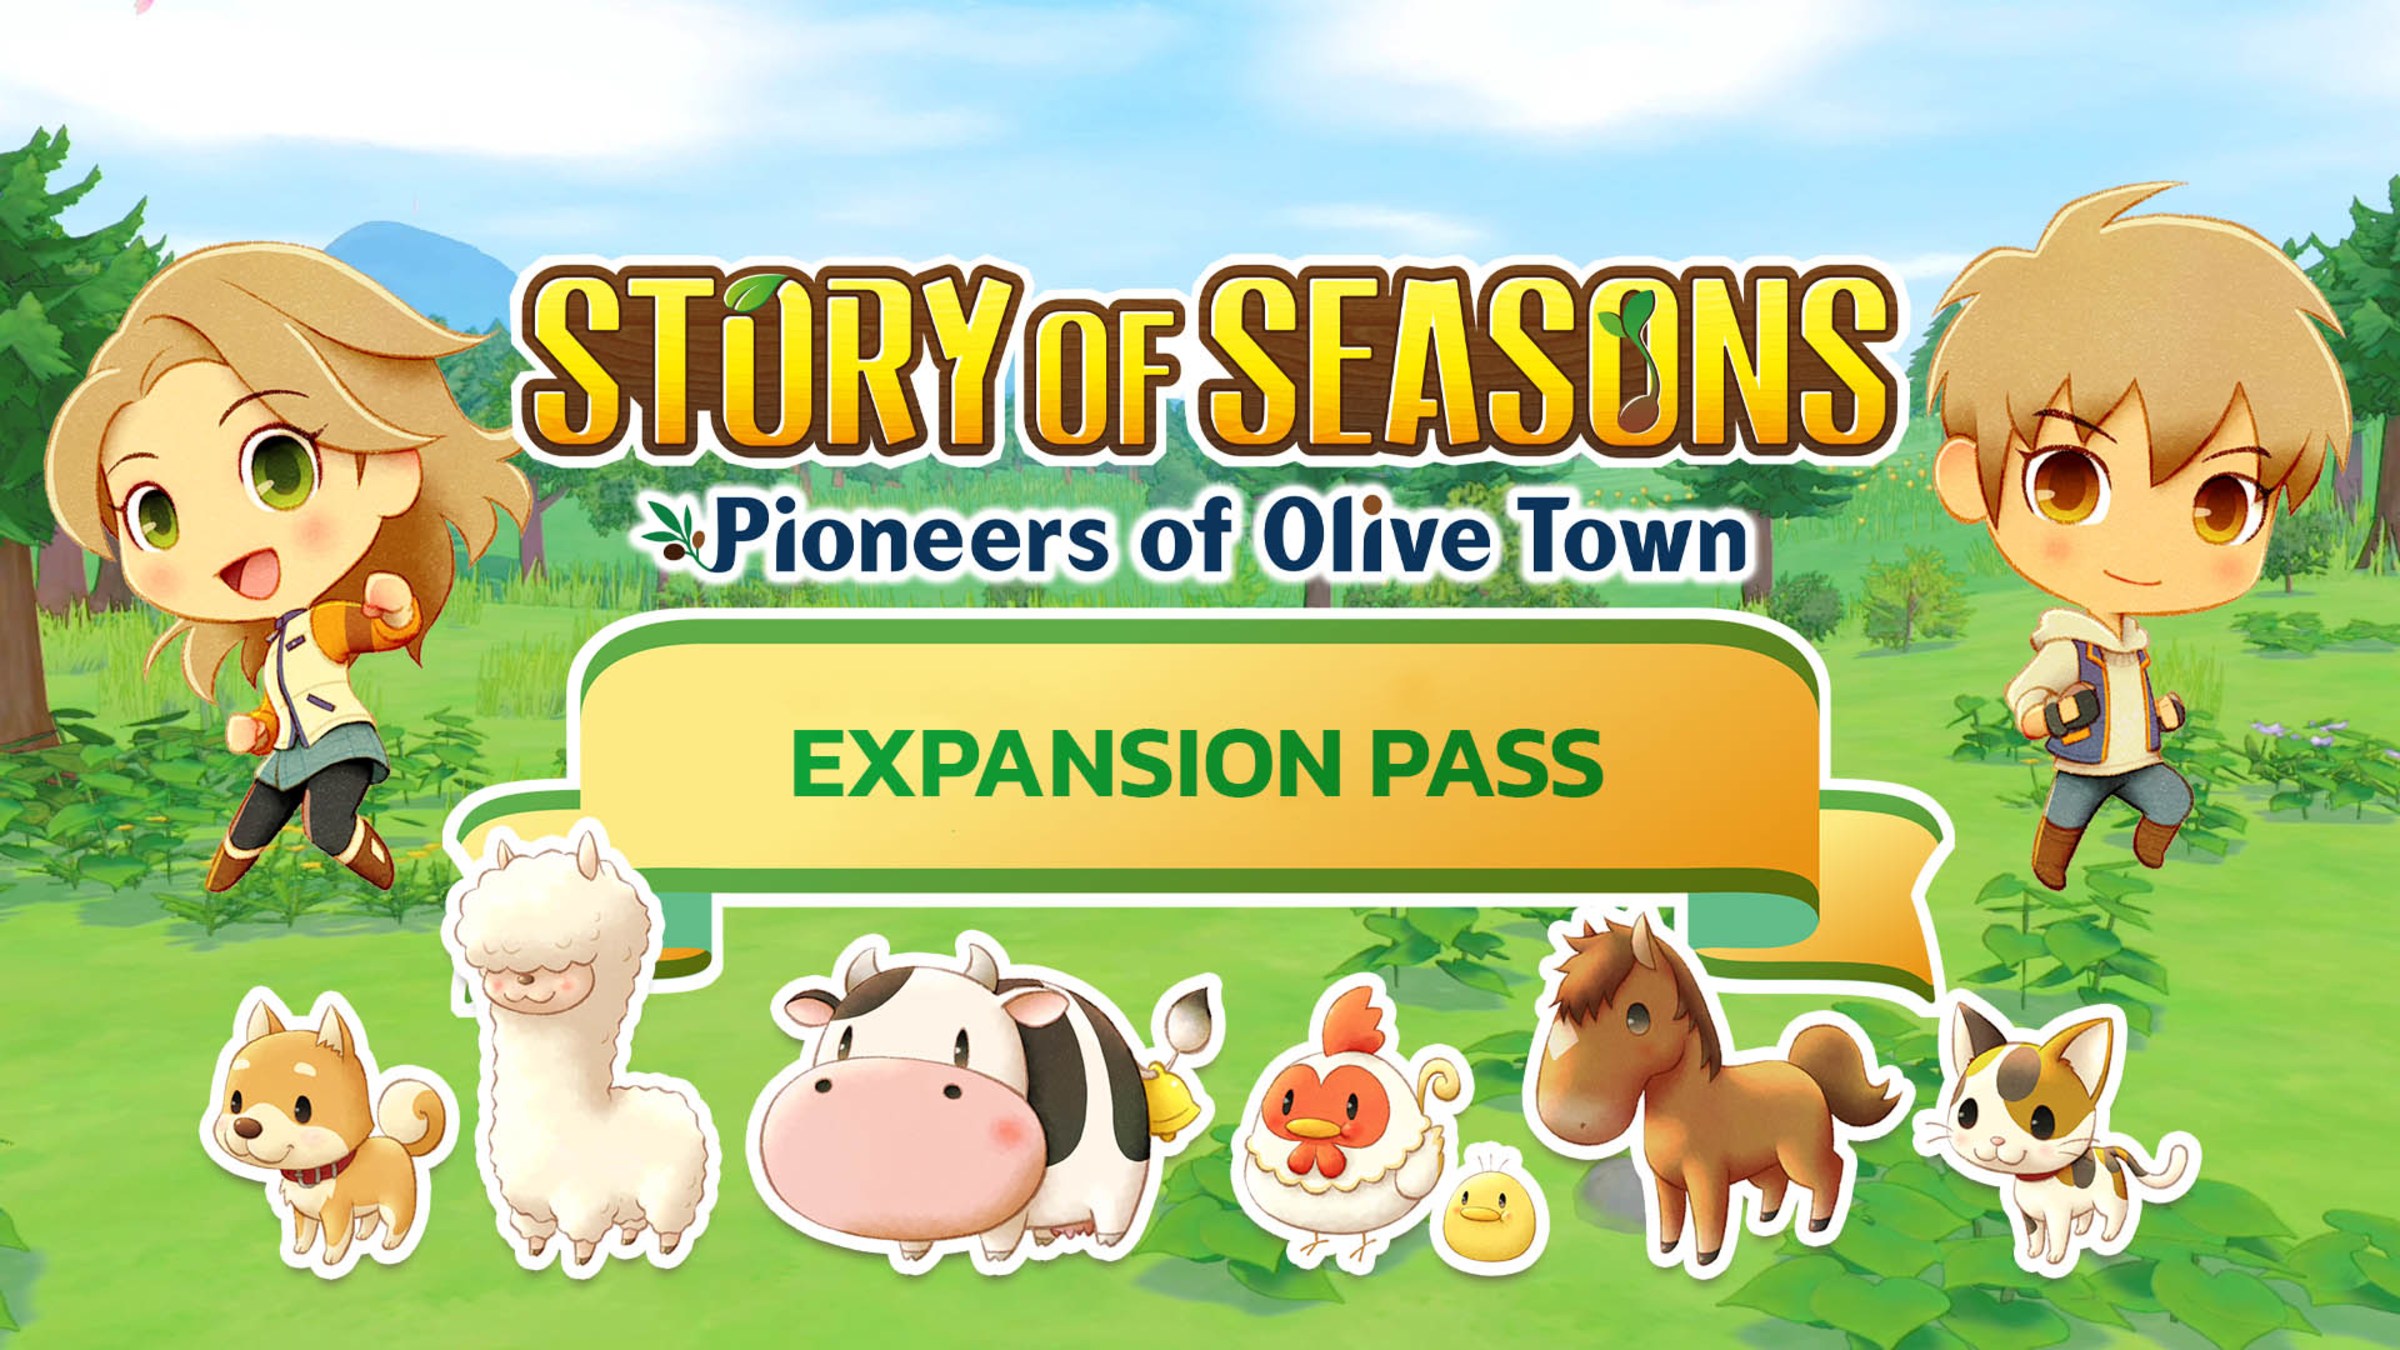 STORY OF SEASONS: Pioneers of Olive Town Expansion Pass for